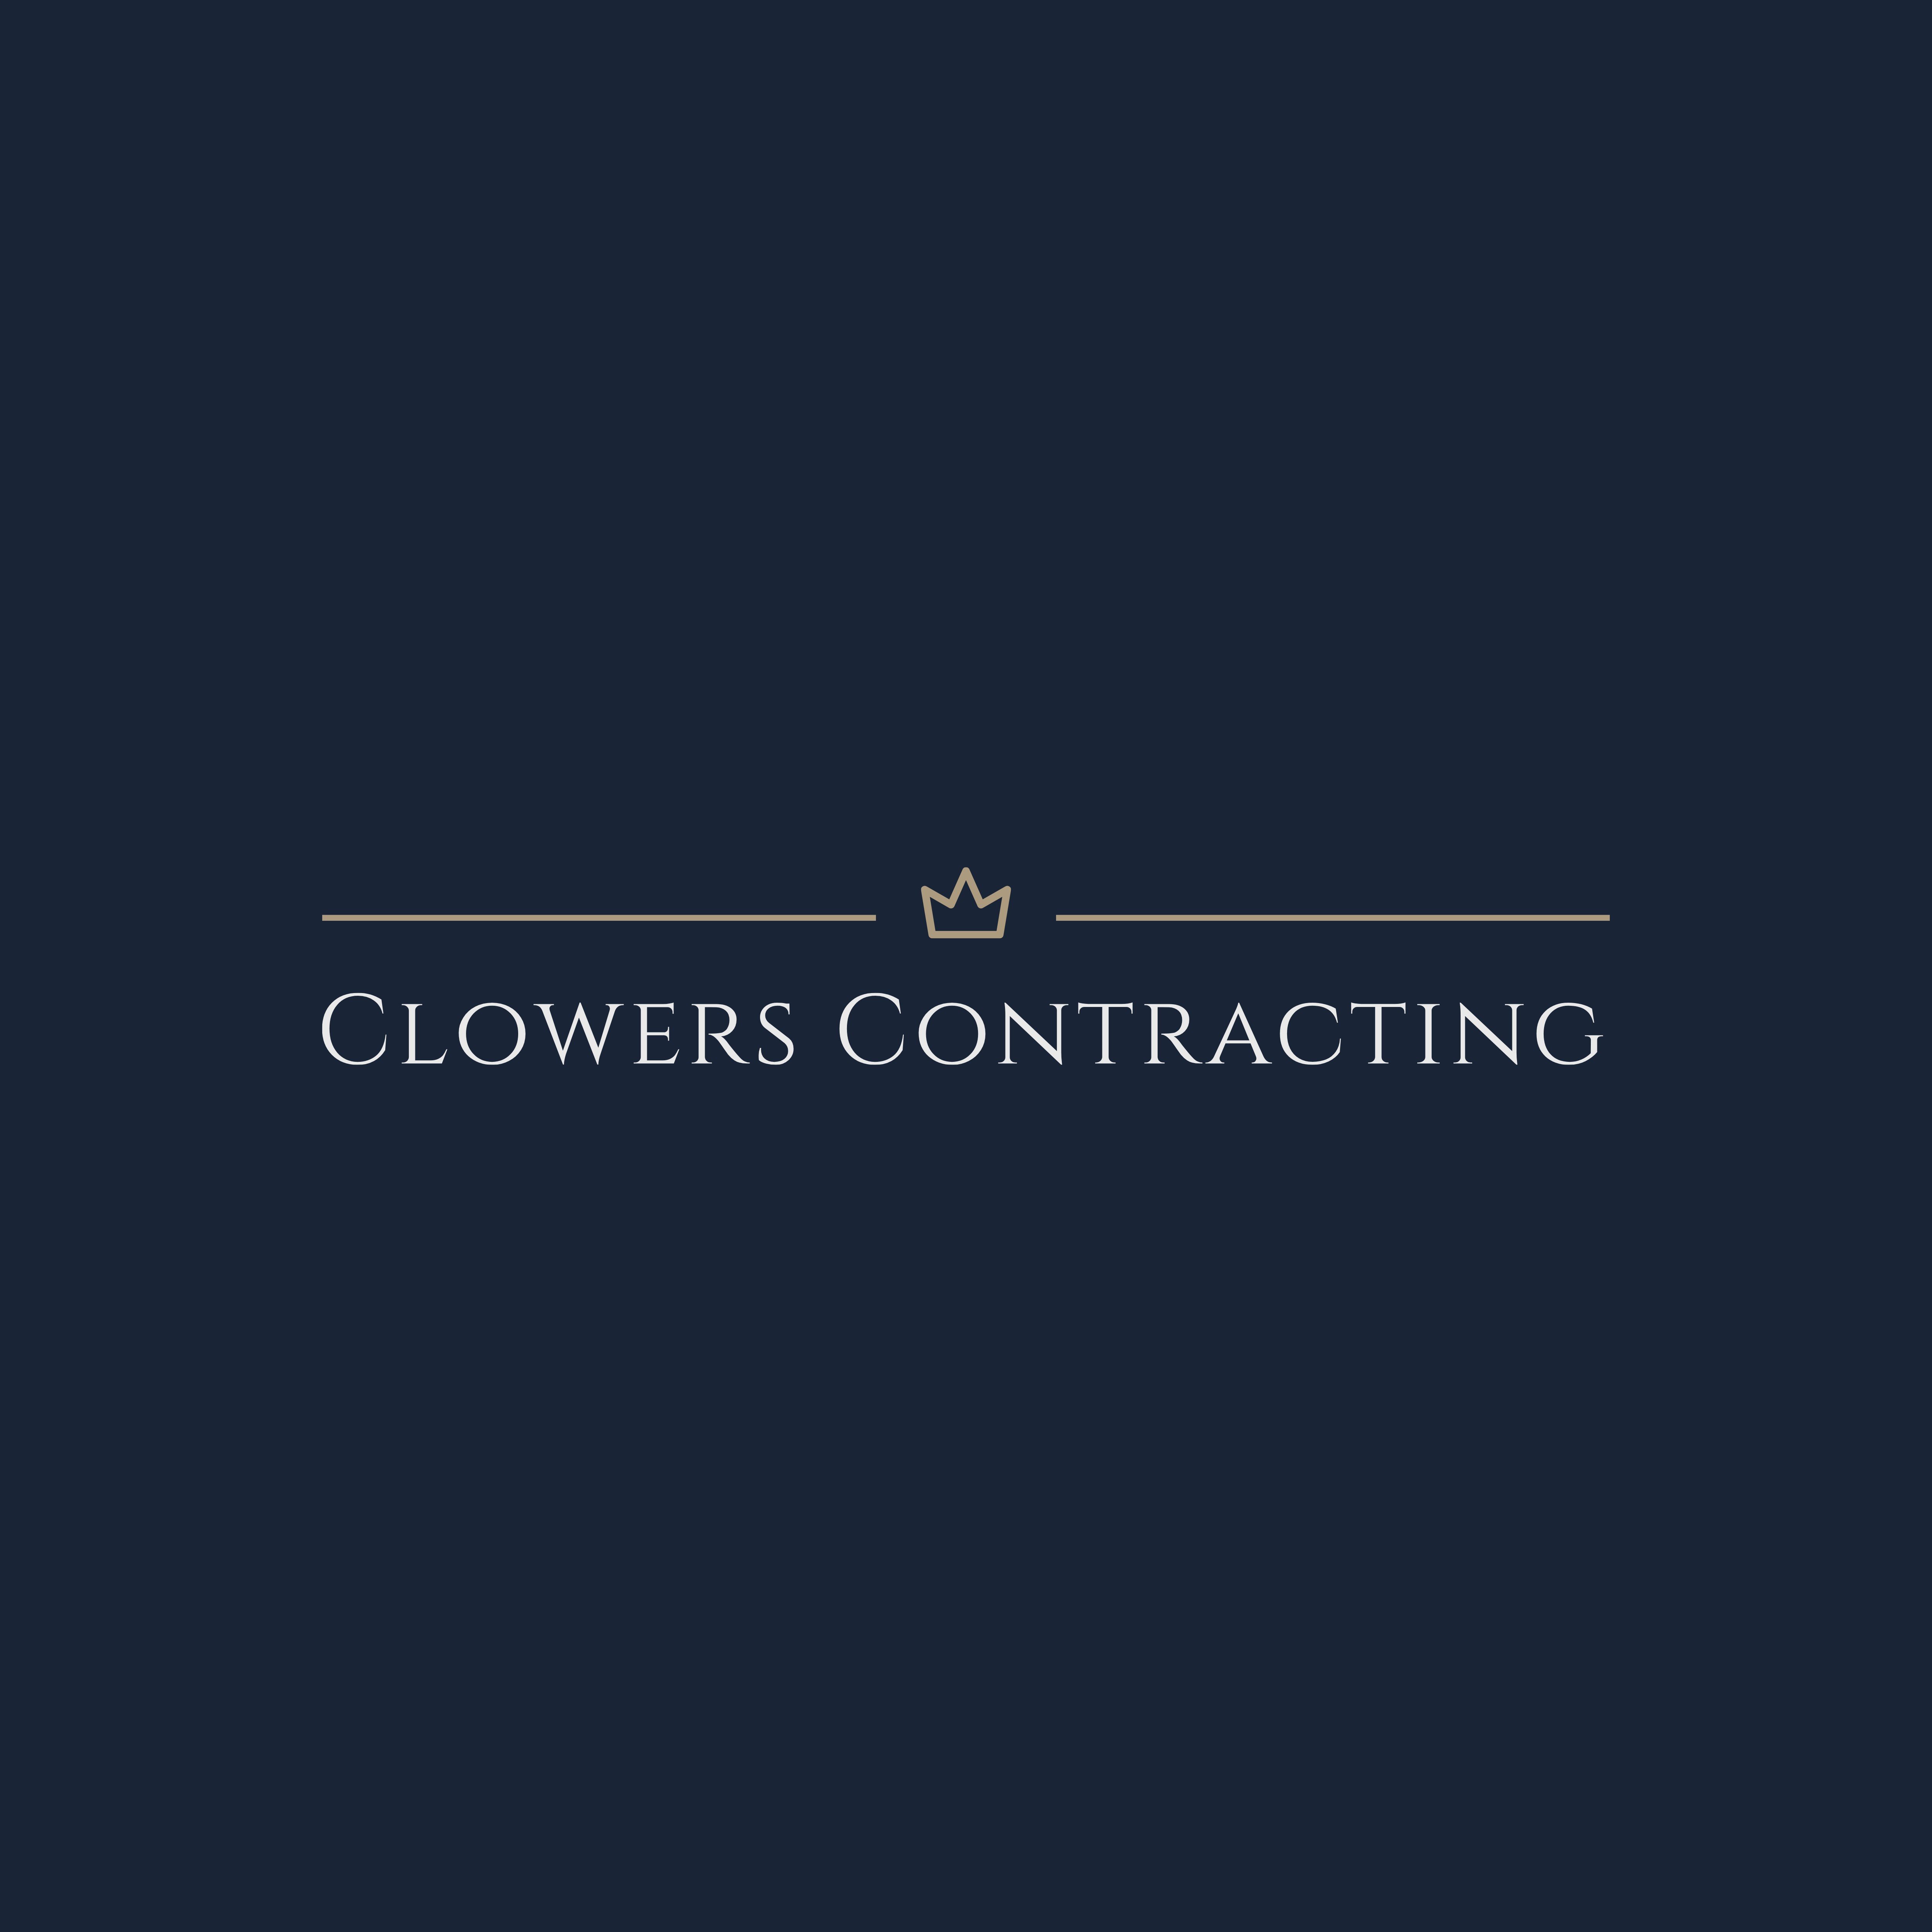 Clowers Contracting Logo